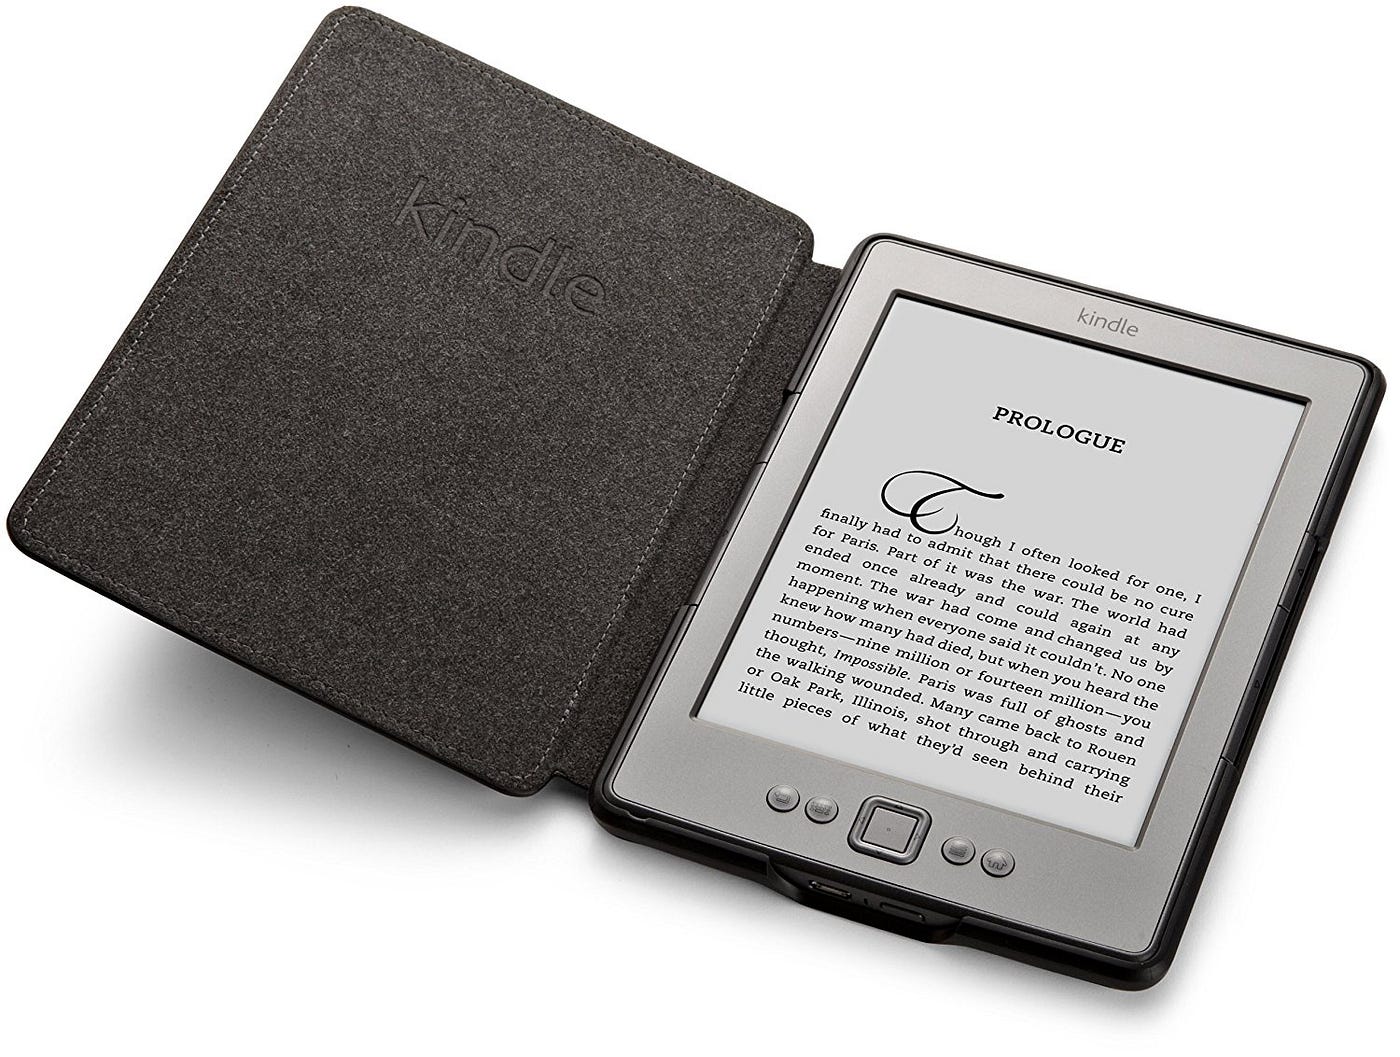 my kindle serial number d01200 what model